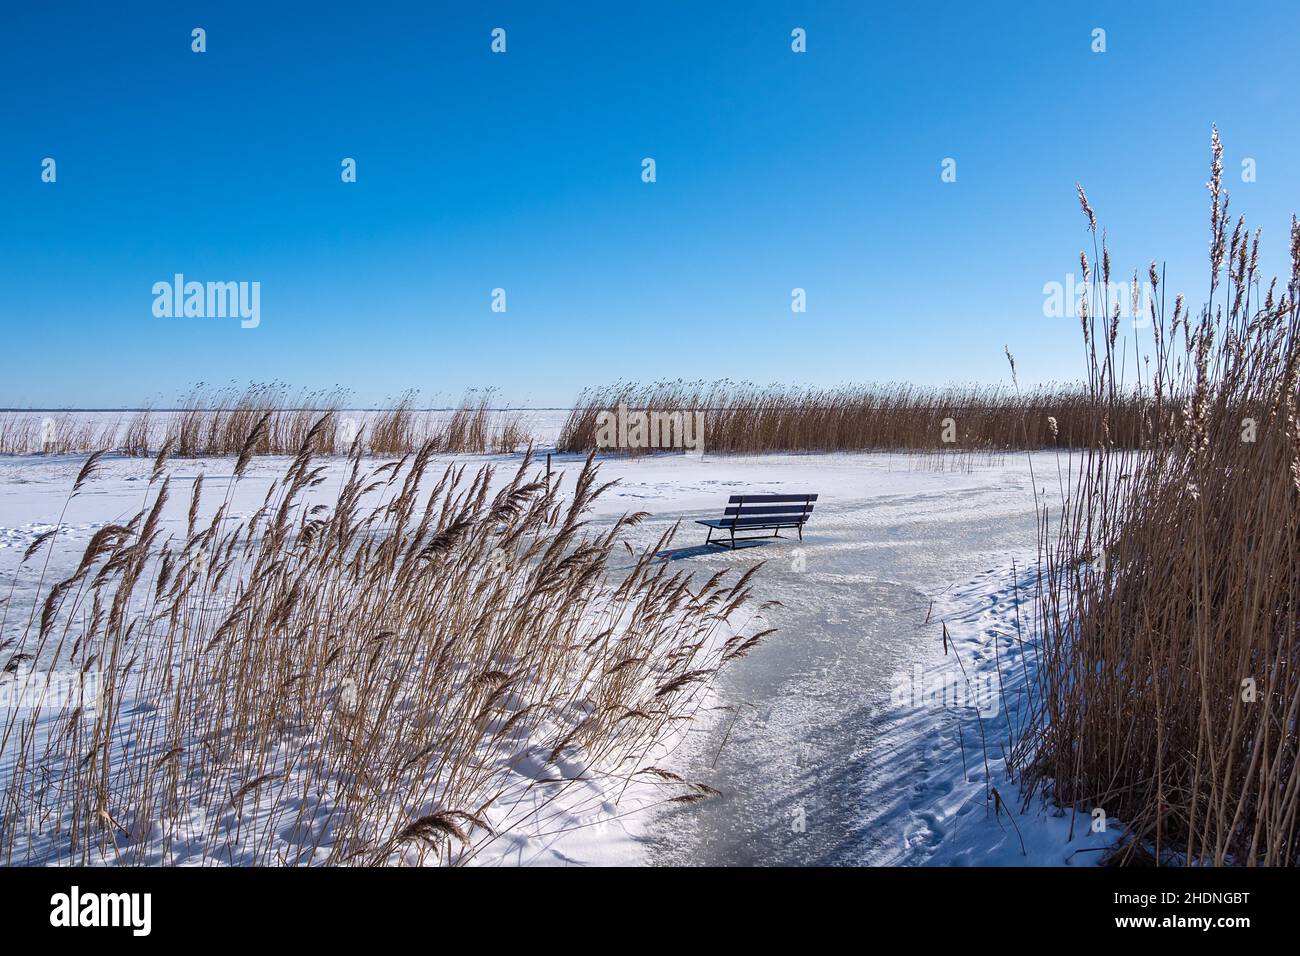 reed, bench, bodden, reeds, benchs, boddens Stock Photo